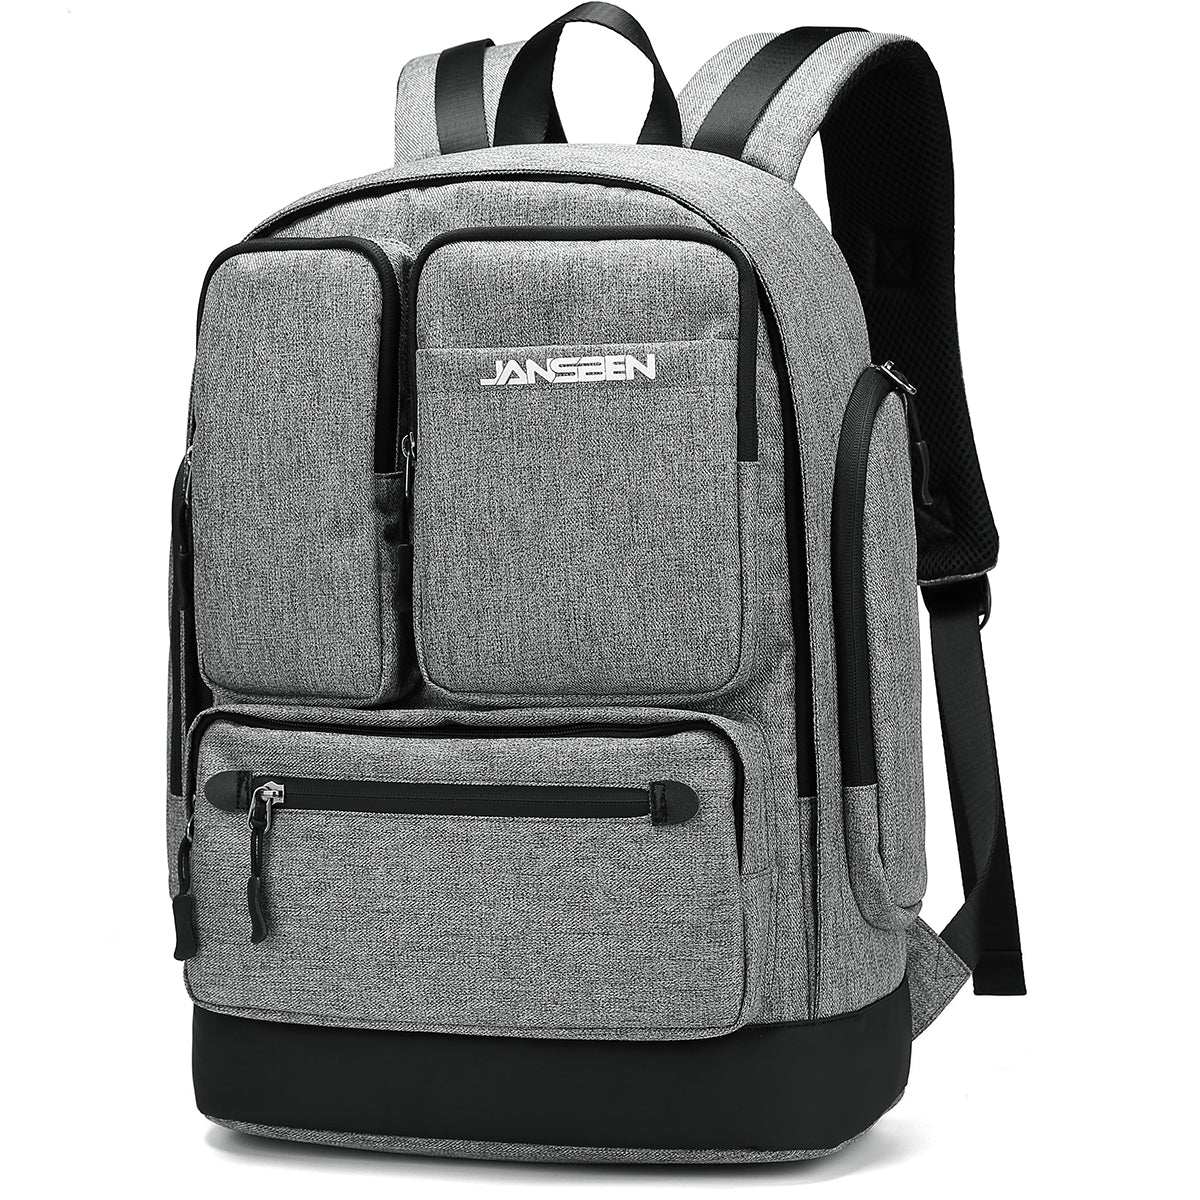 gray laptop backpack 